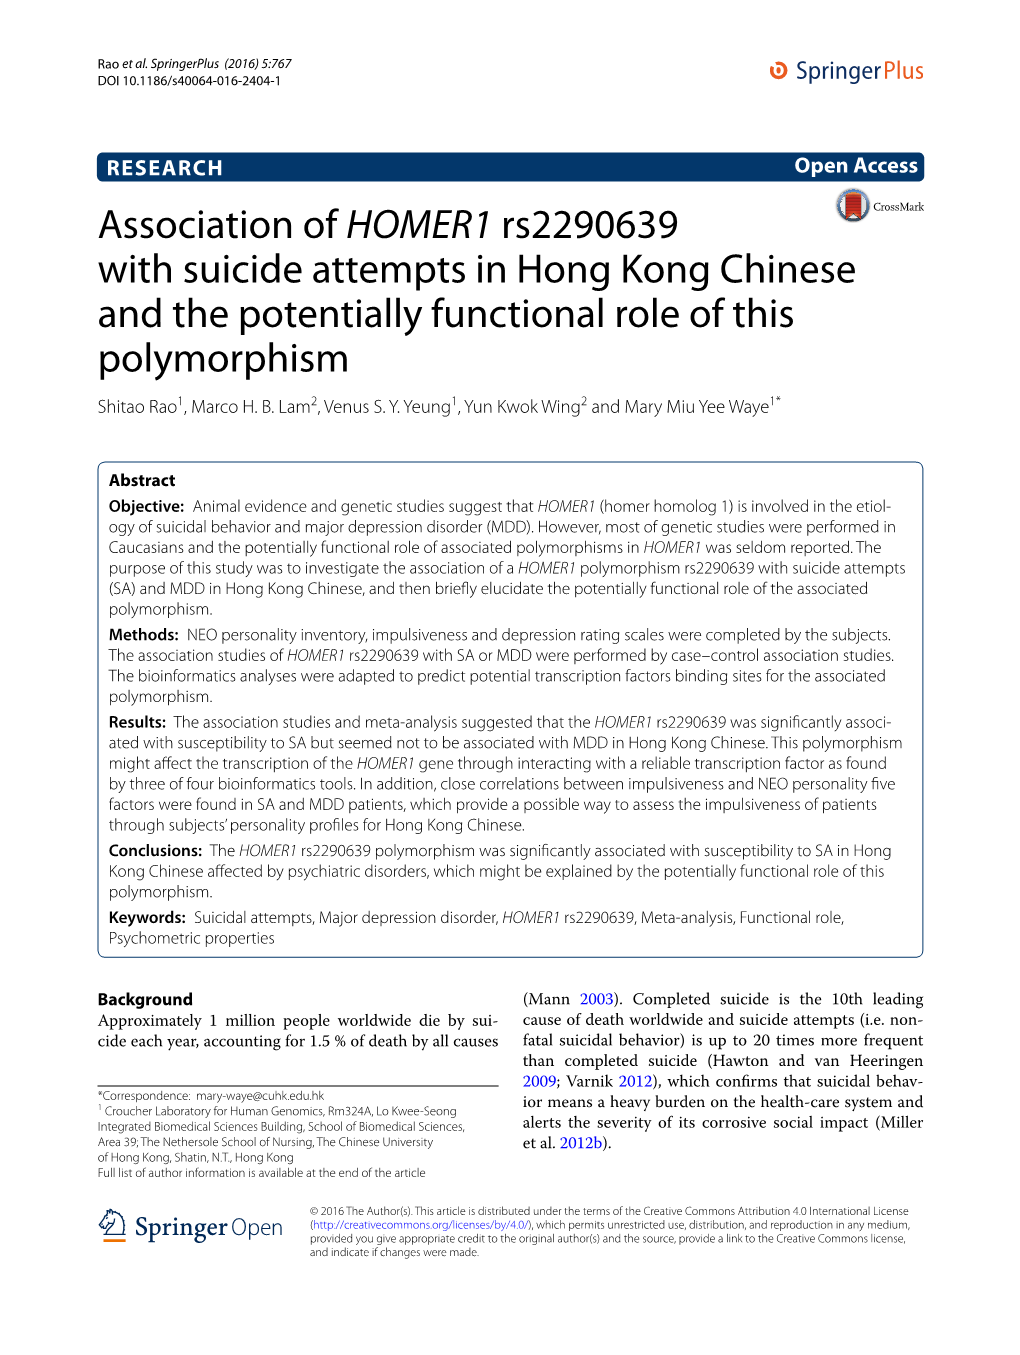 Association of HOMER1 Rs2290639 with Suicide Attempts in Hong Kong Chinese and the Potentially Functional Role of This Polymorphism Shitao Rao1, Marco H